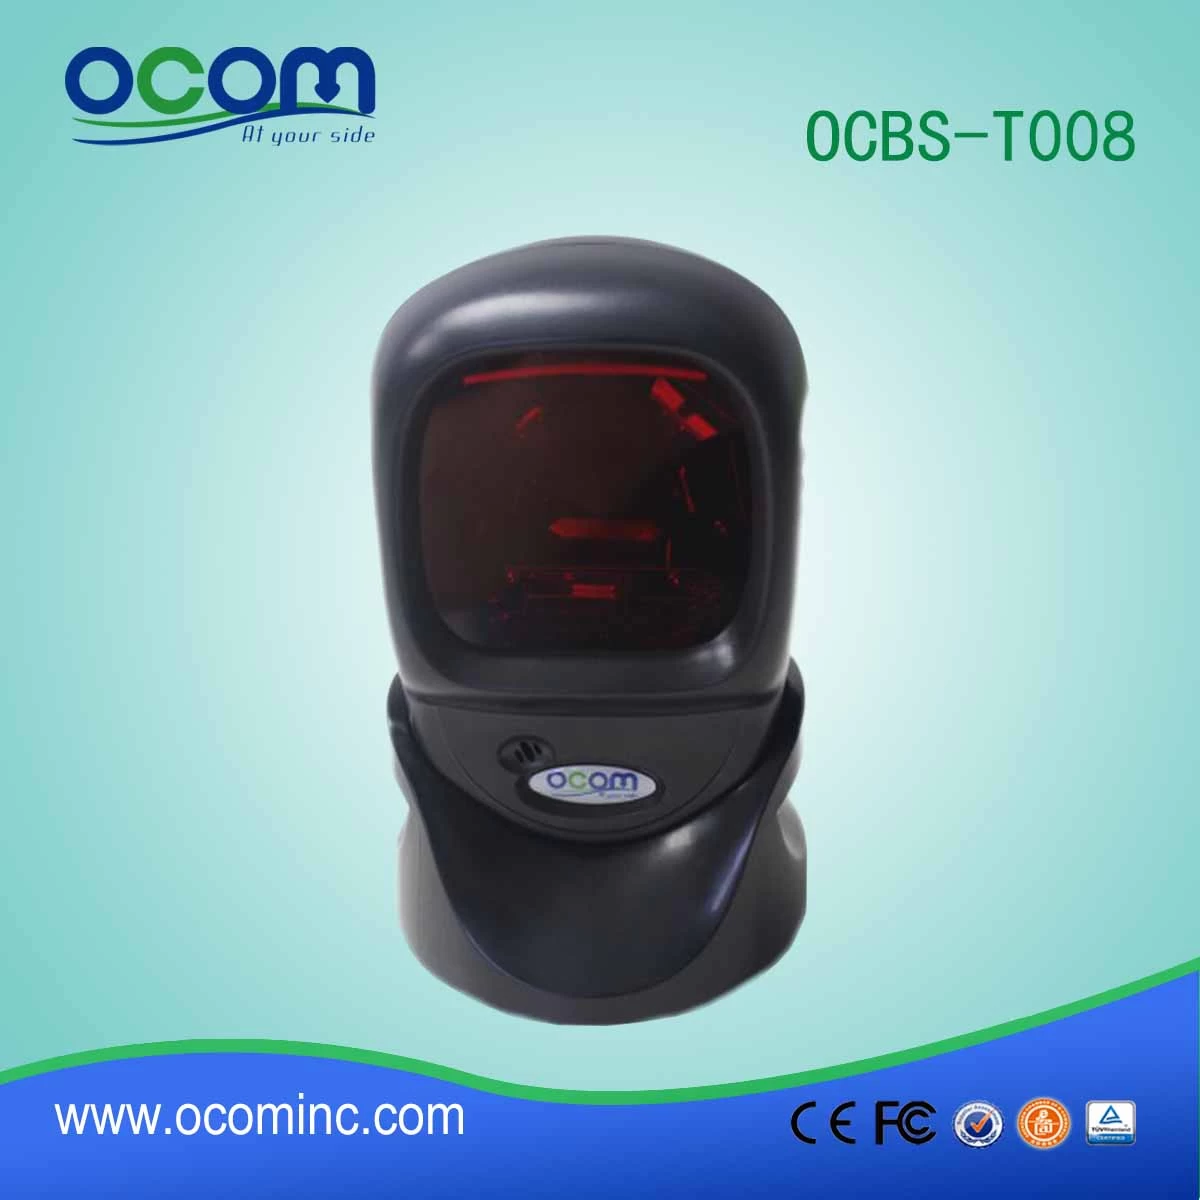 Omni directional desktop usb barcode scanner with long distance